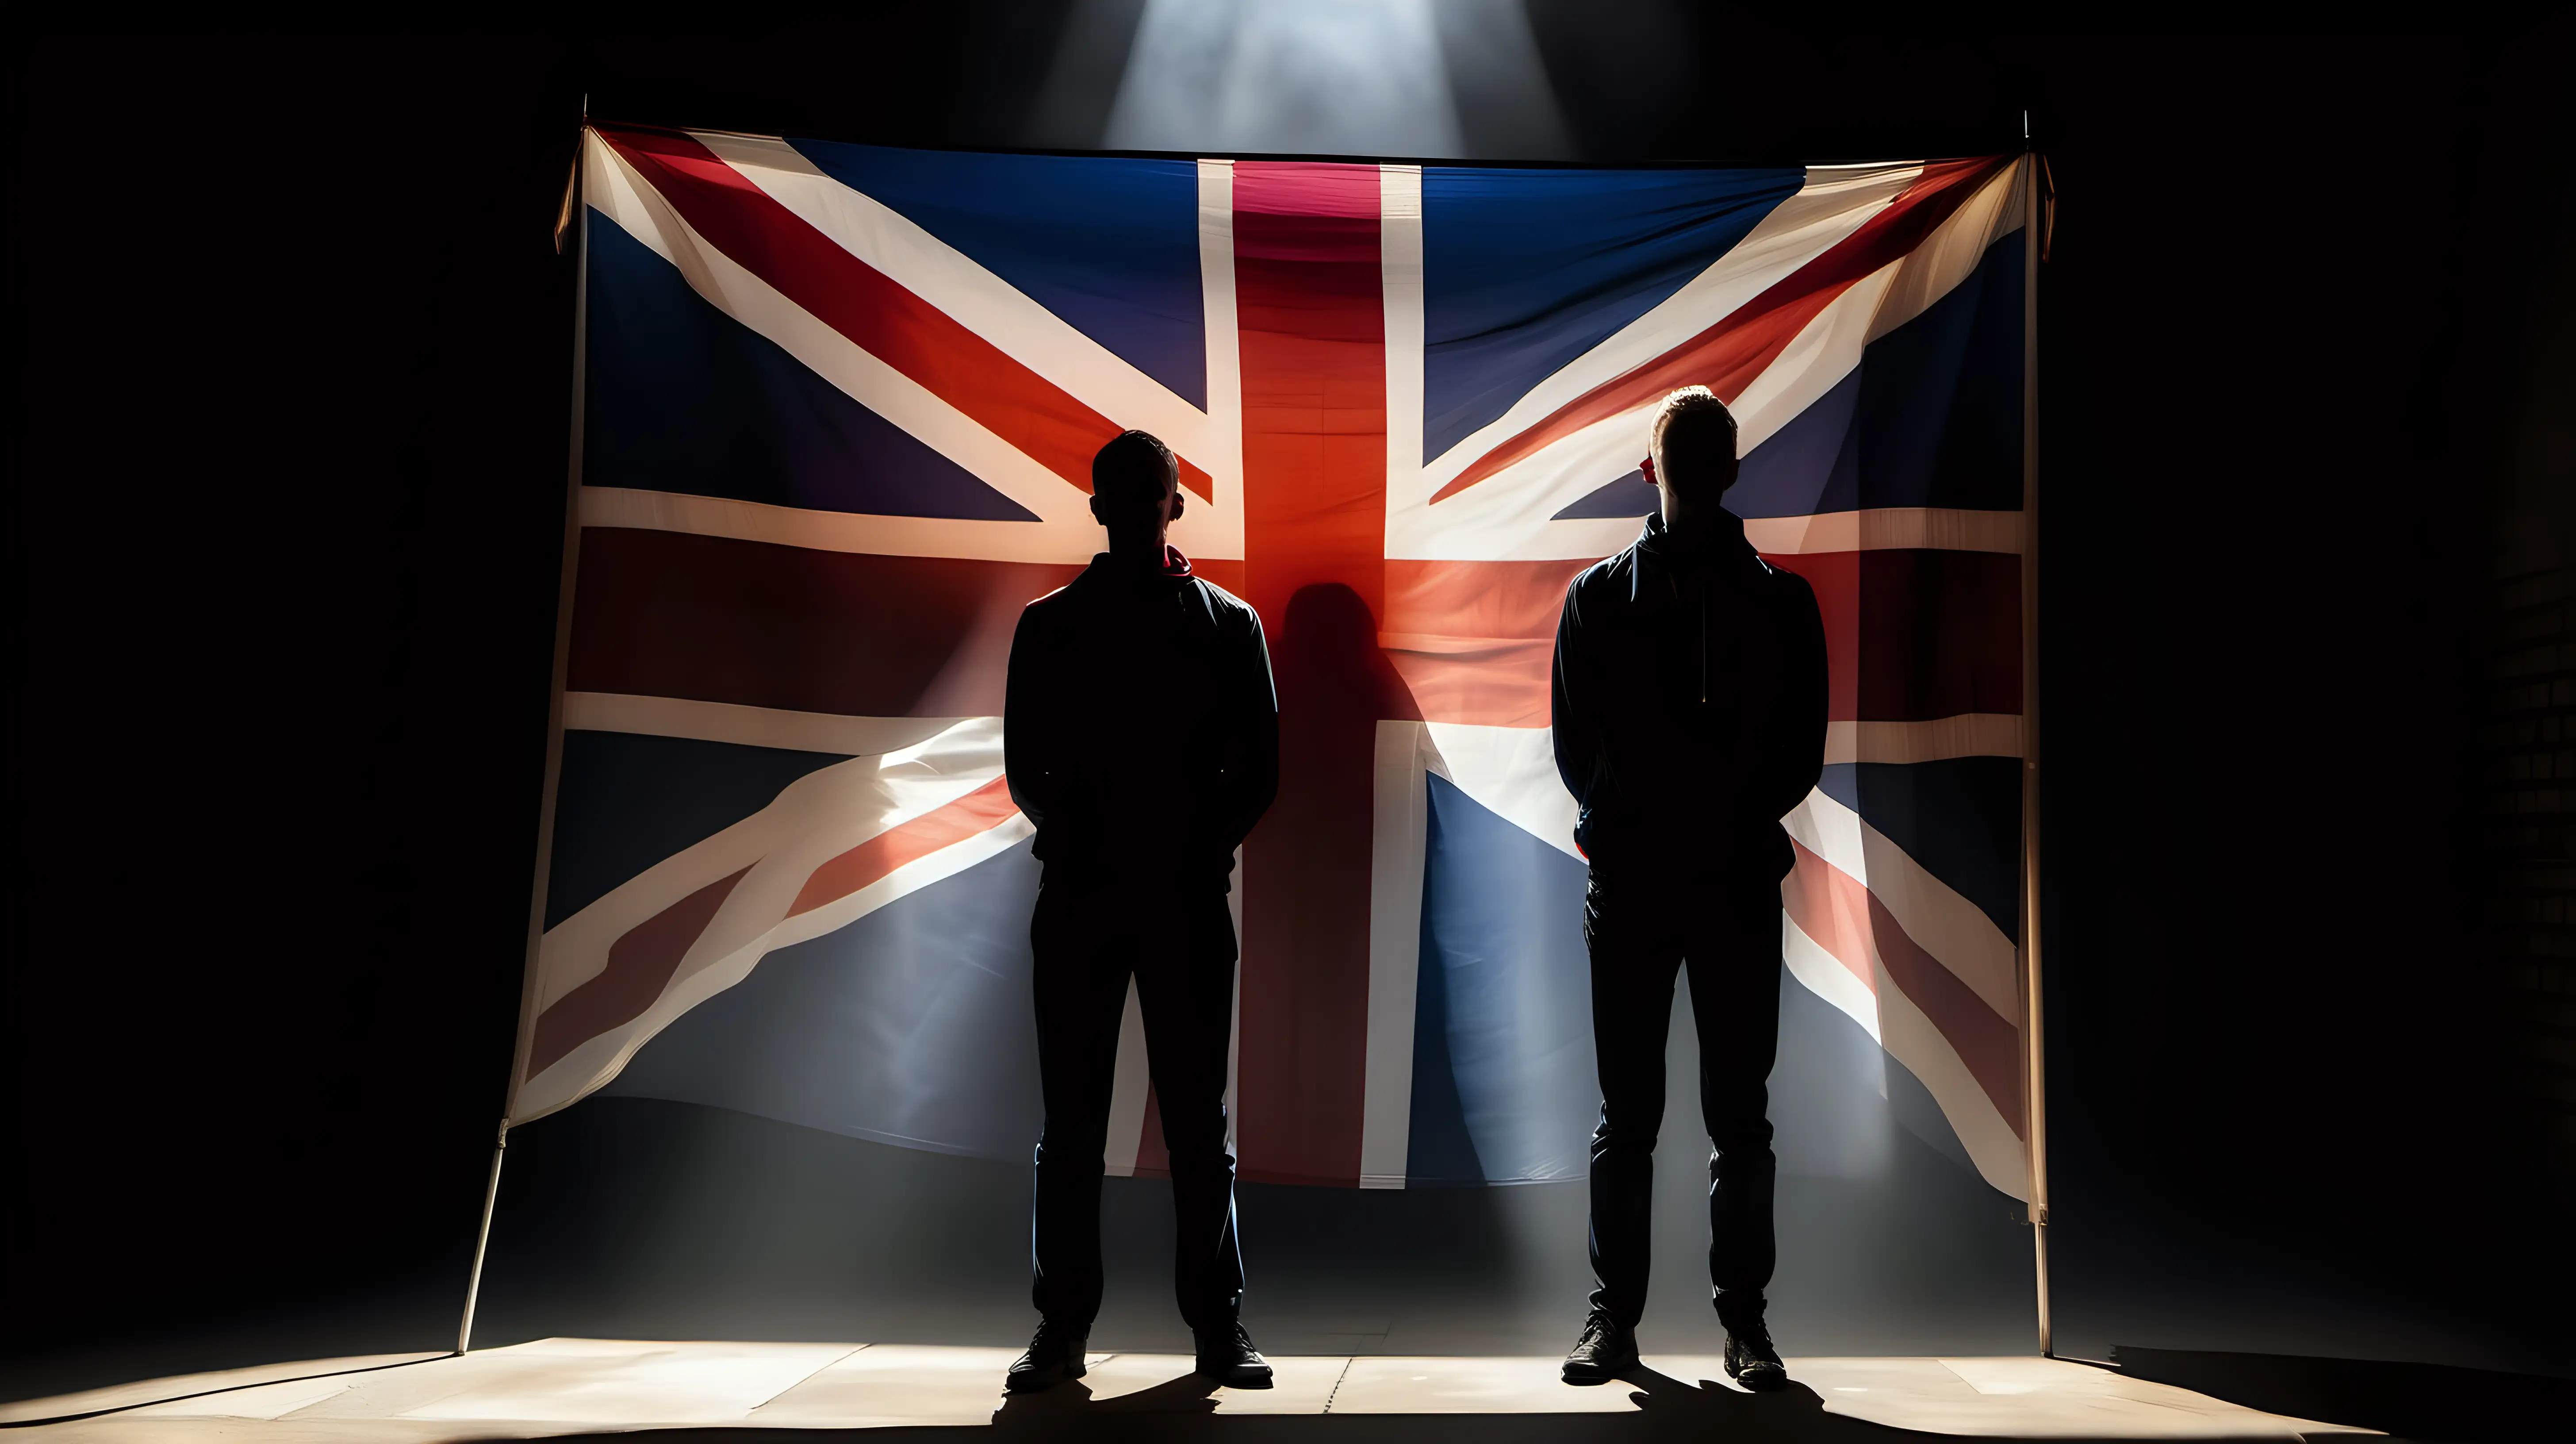 "Pride in the light: Capture the powerful image of a person standing tall, holding a glowing Union Jack flag, the light casting shadows that echo the strength of their patriotic convictions."